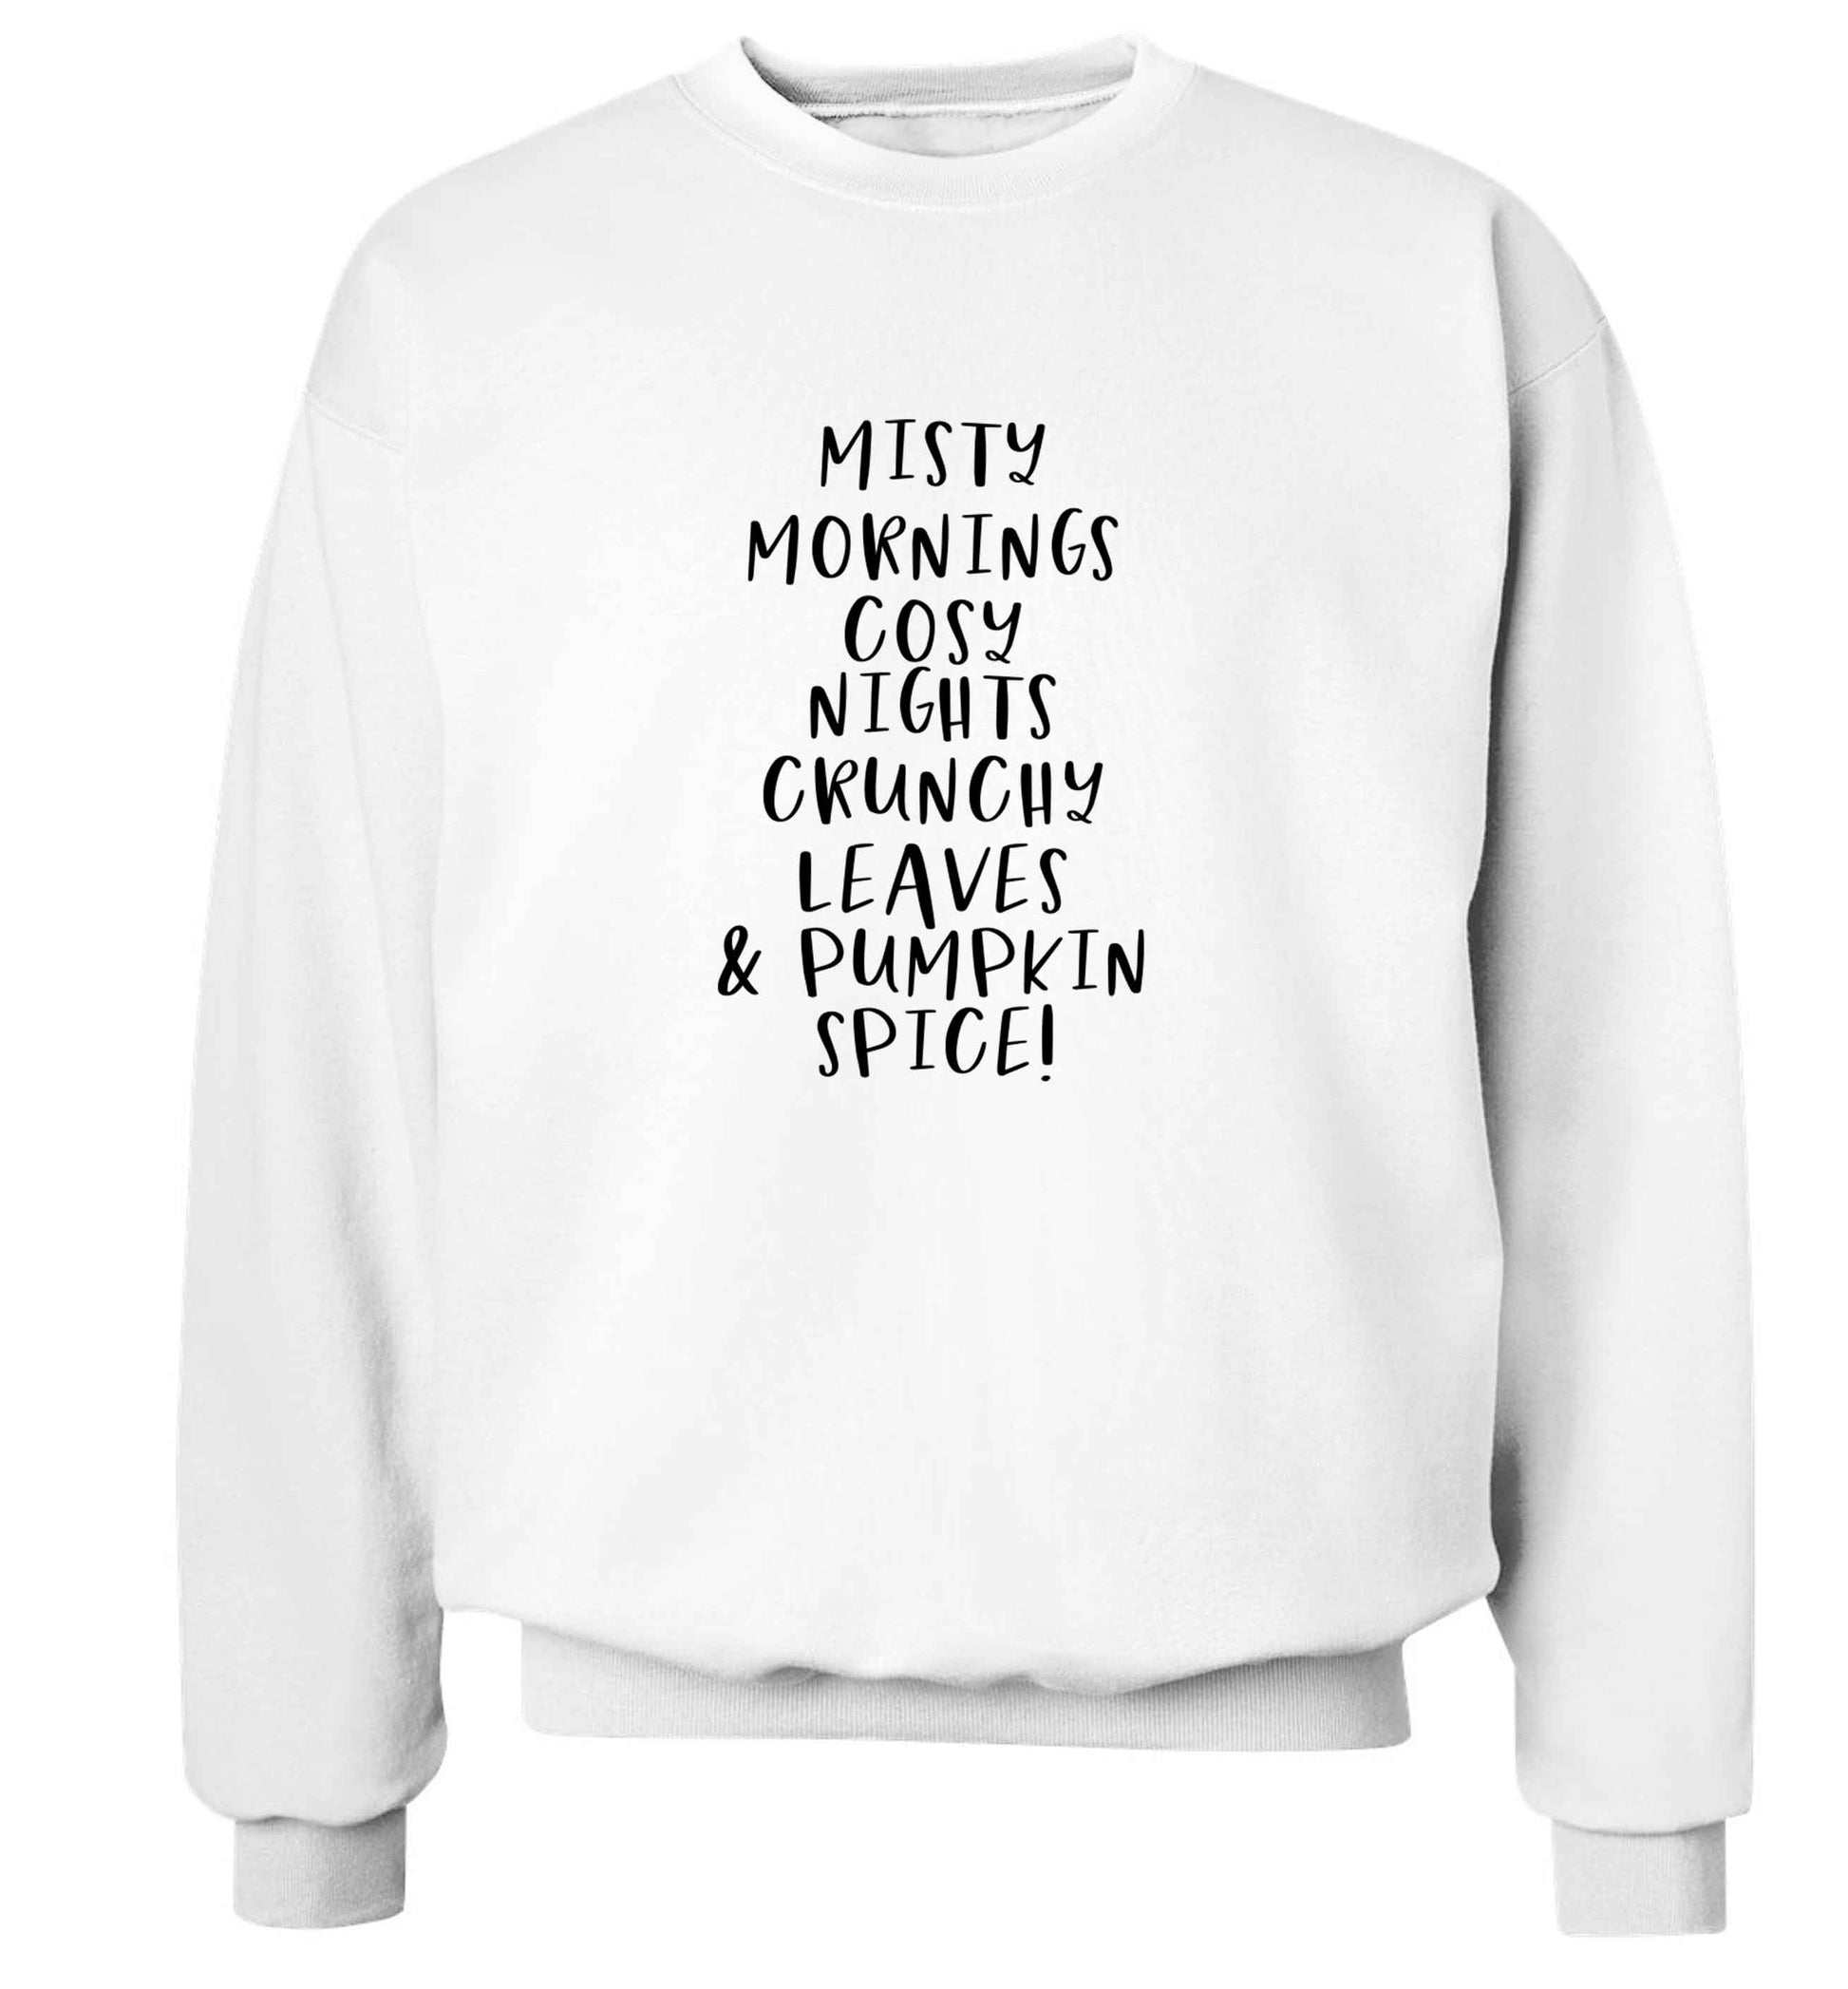 Misty Mornings adult's unisex white sweater 2XL